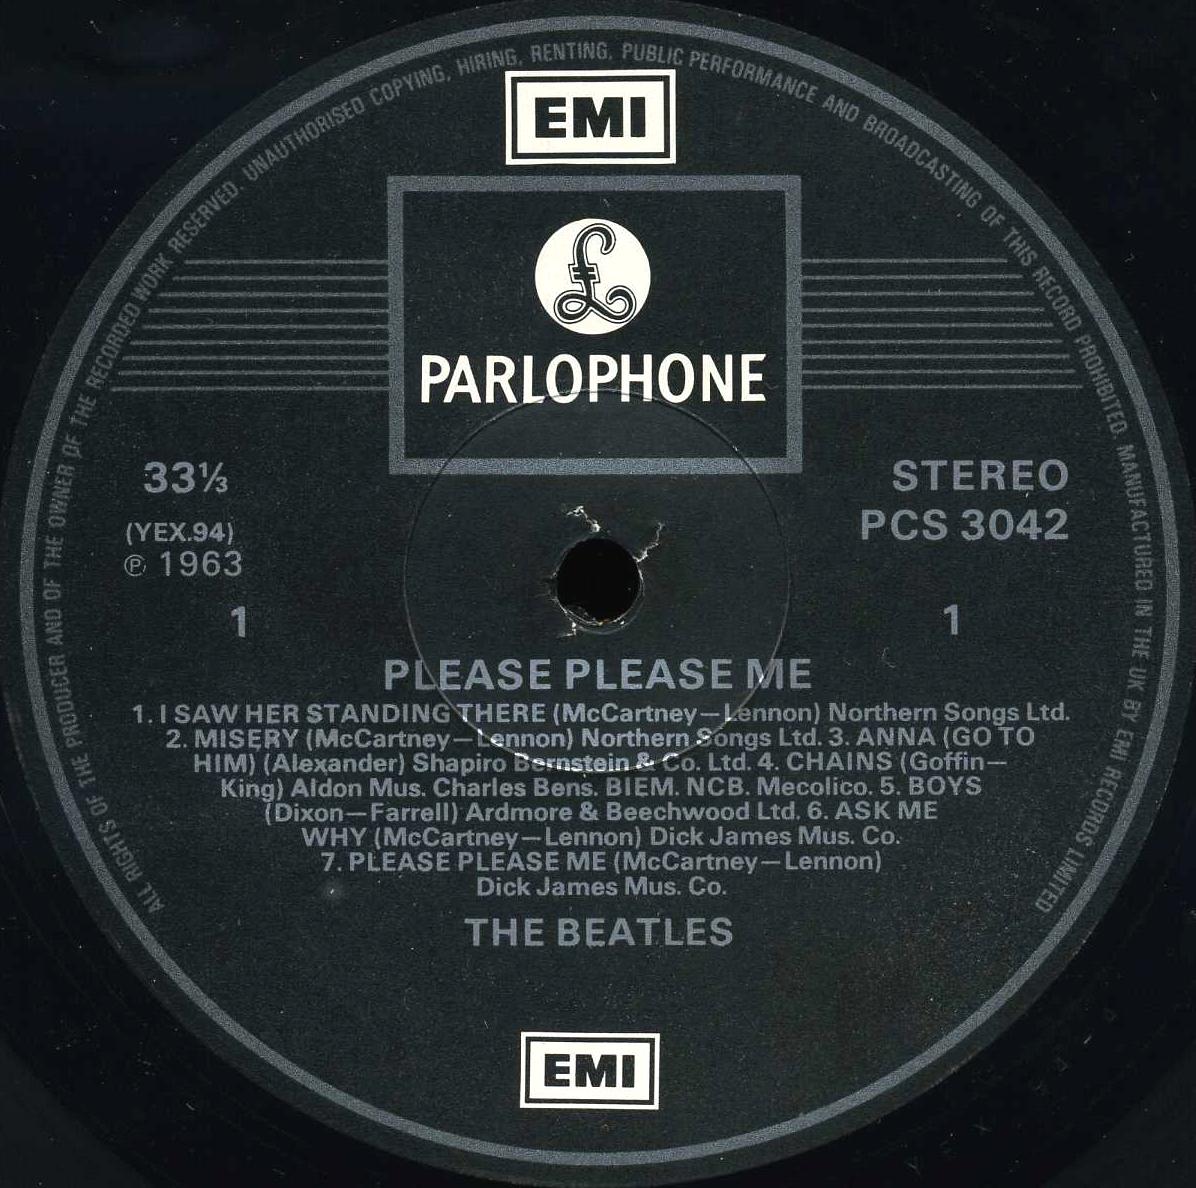 The Beatles Collection » 02. Beatles on Parlophone Records. Part 1 